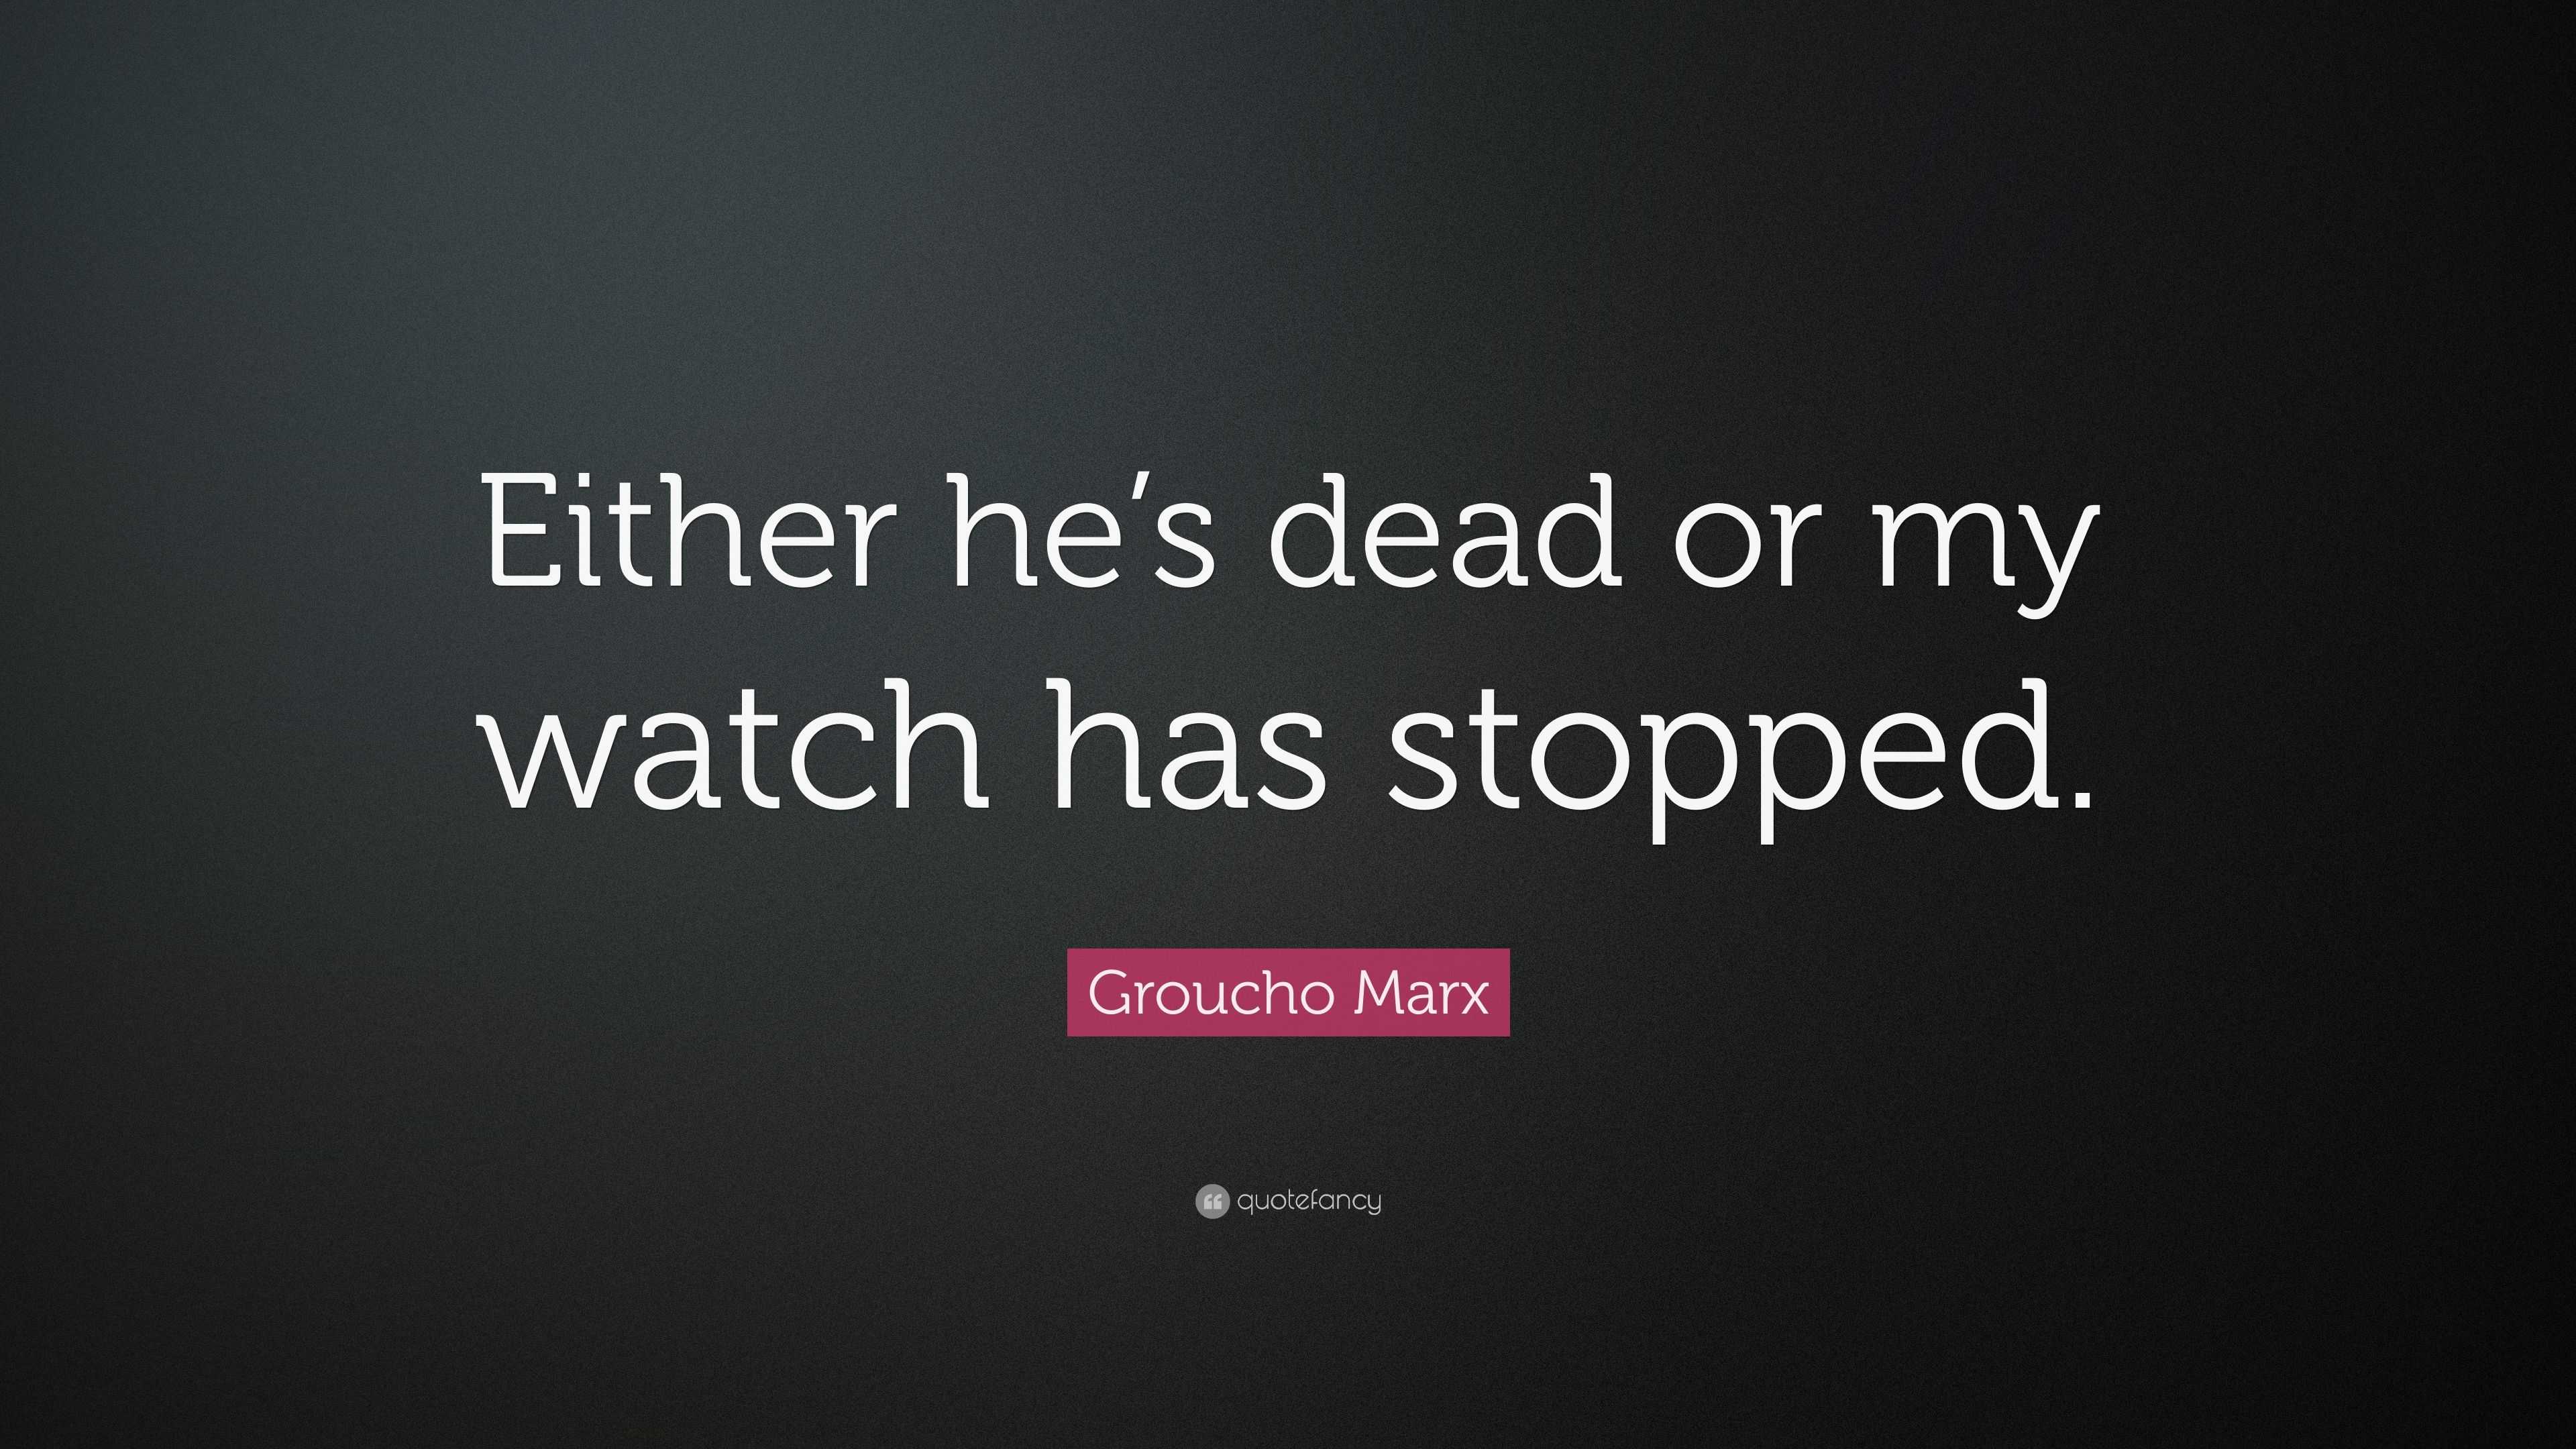 3533464 Groucho Marx Quote Either he s dead or my watch has stopped